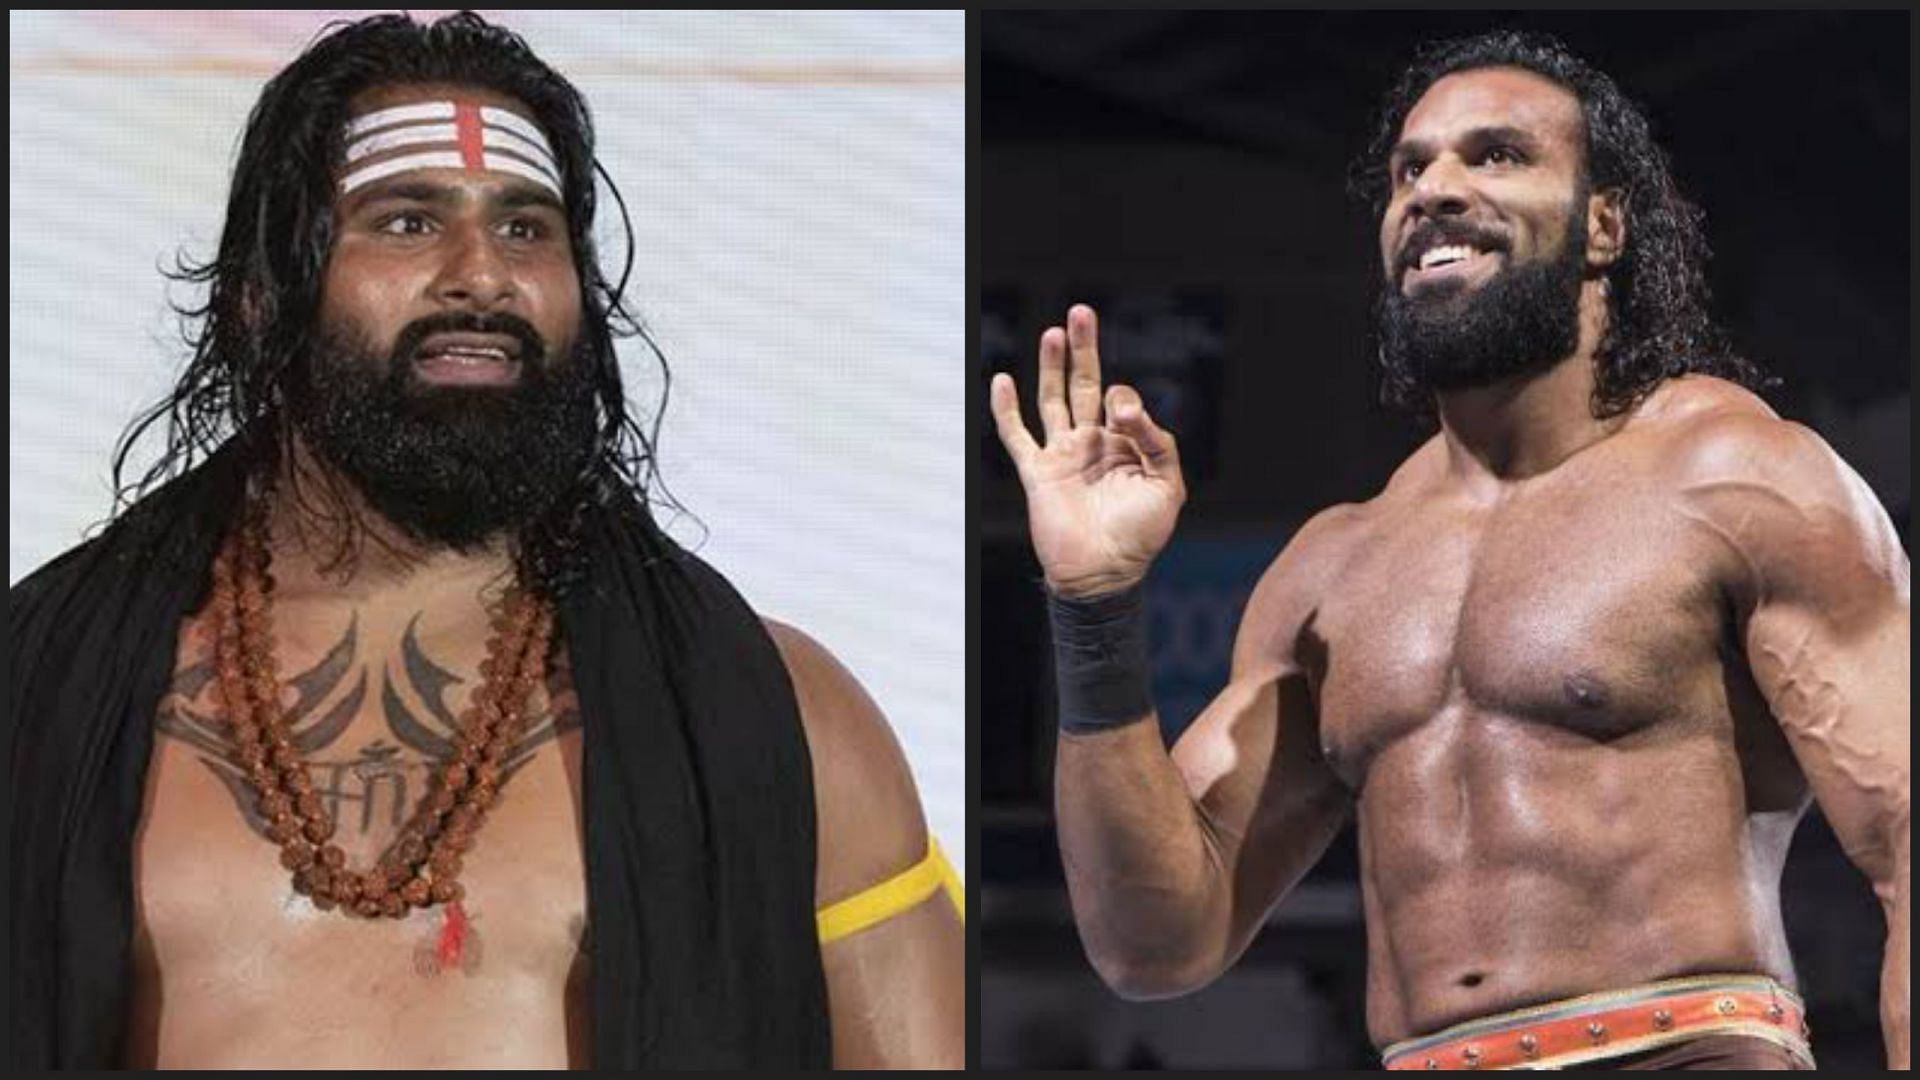 These Indian superstars are currently under contract with WWE